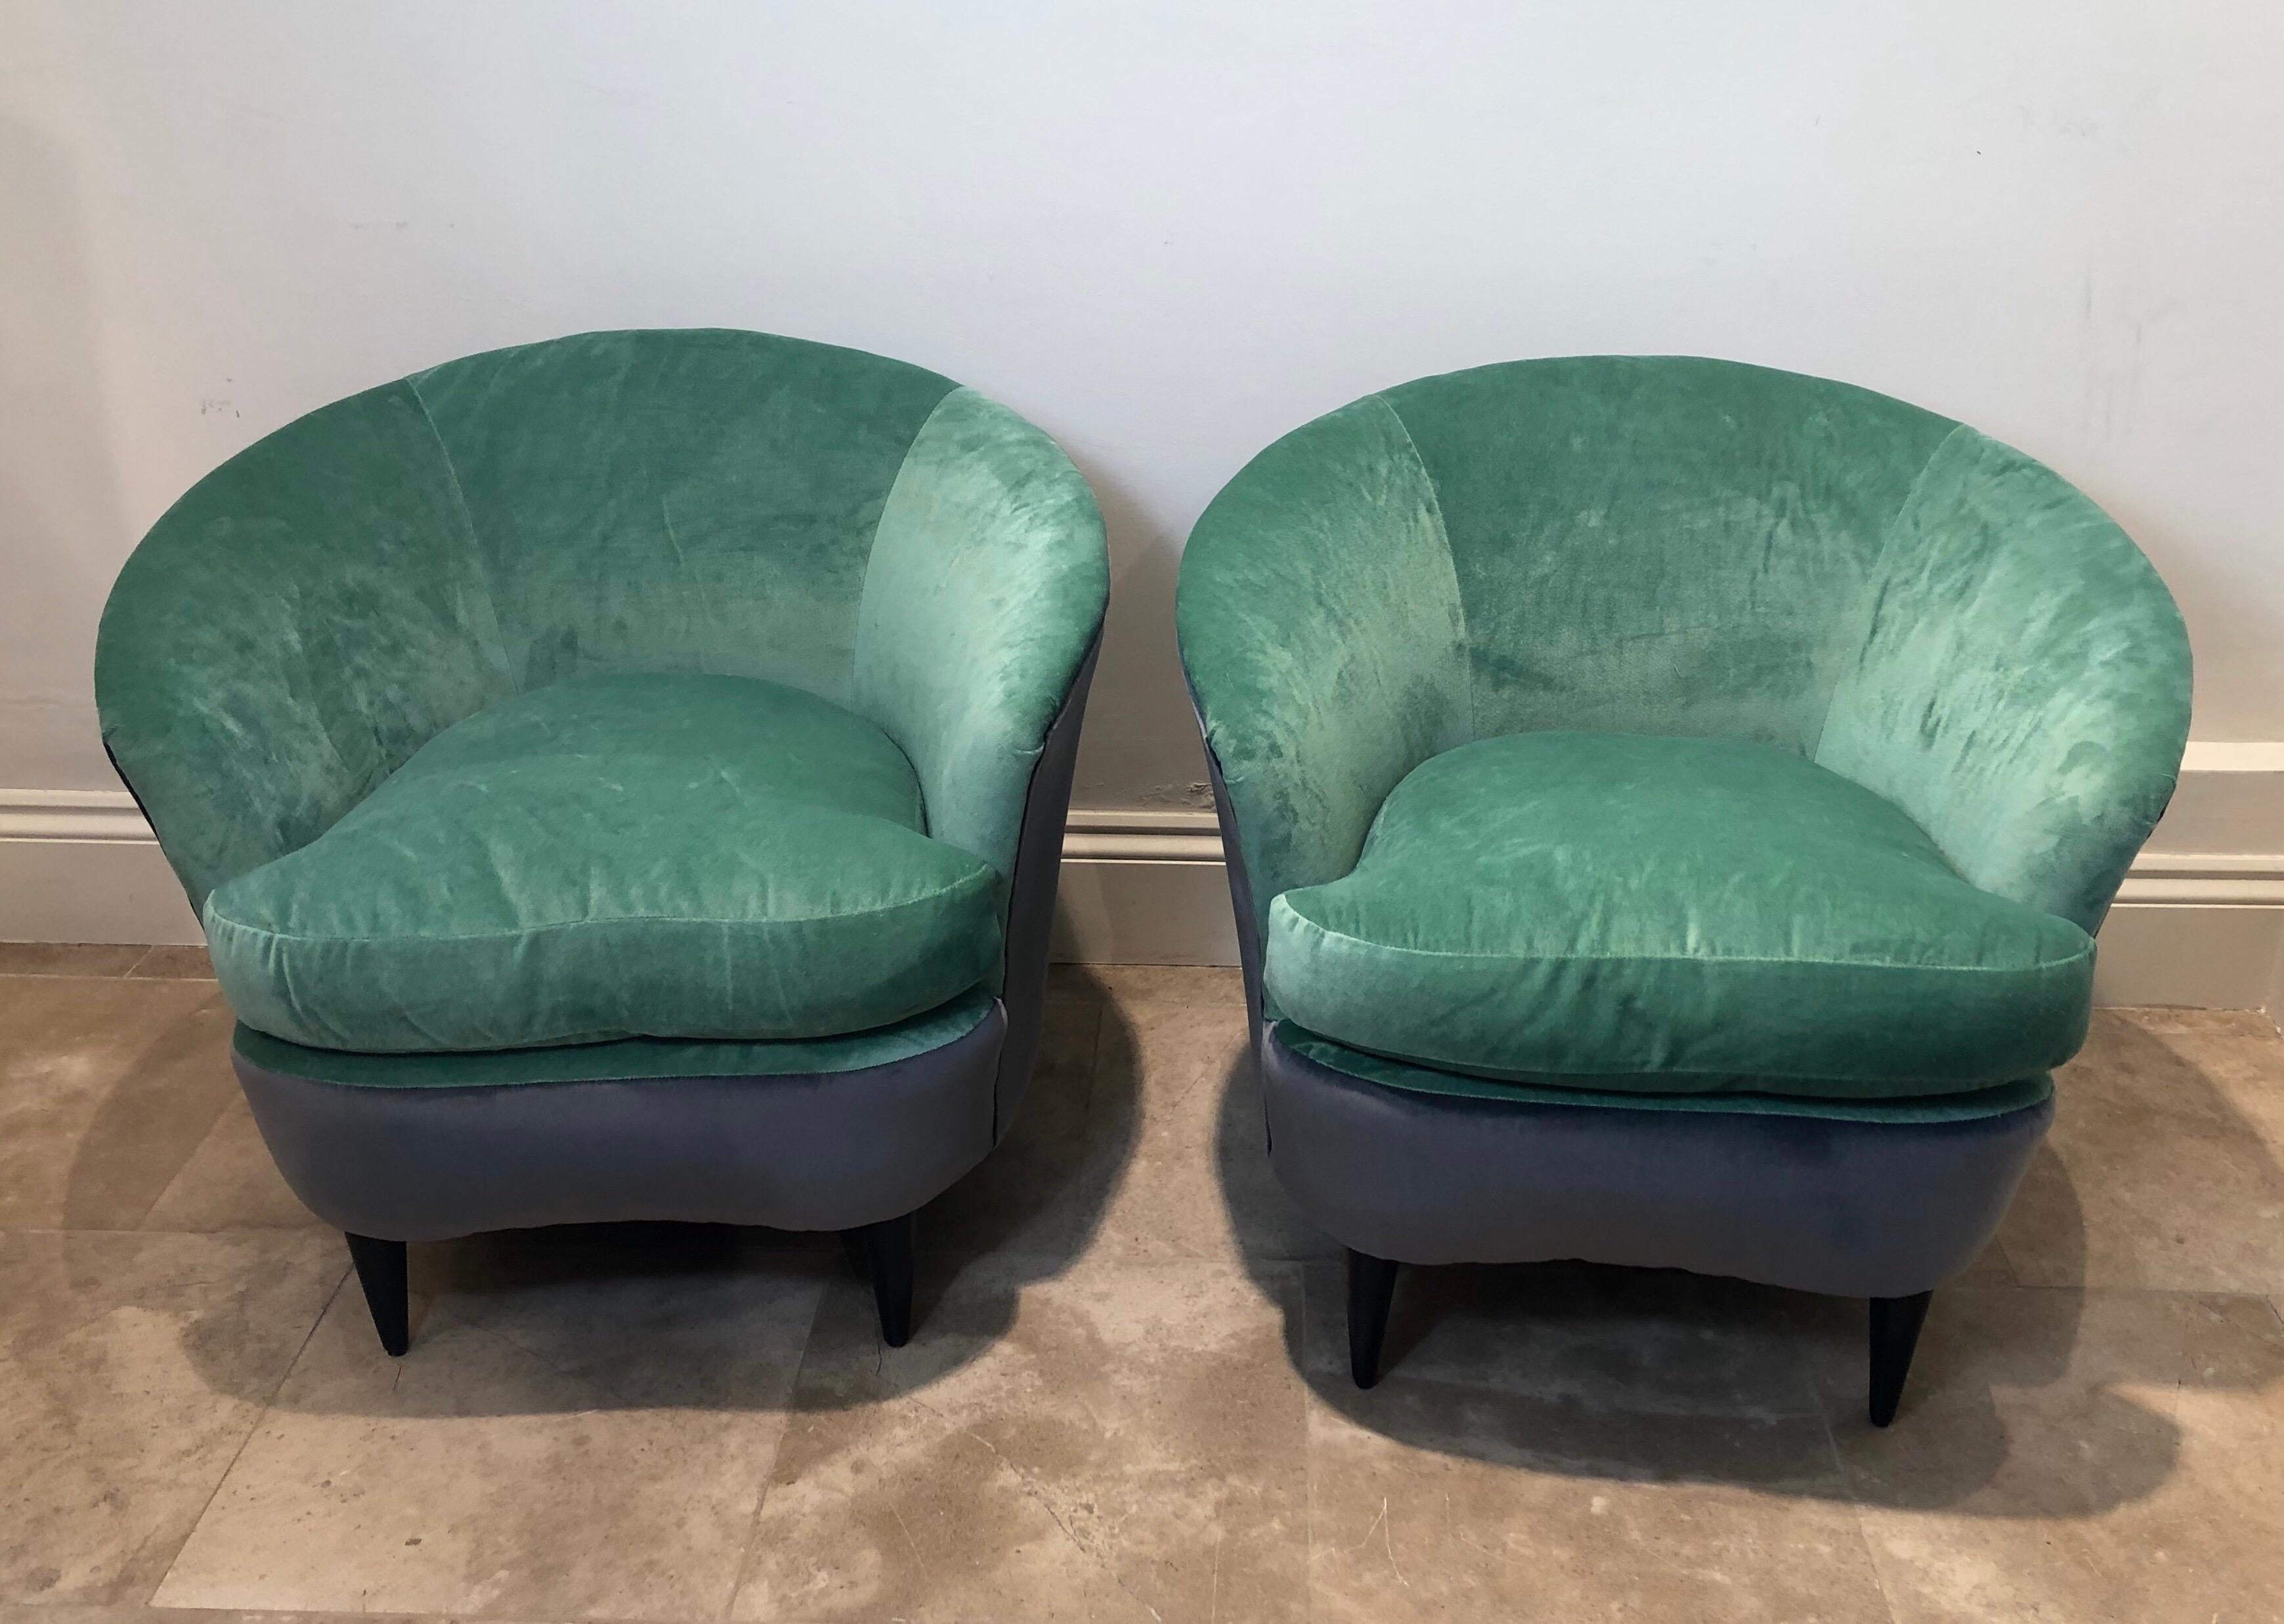 Pair of Italian Curved Chairs and Stools with Mint Green and Grey Upholstery For Sale 2